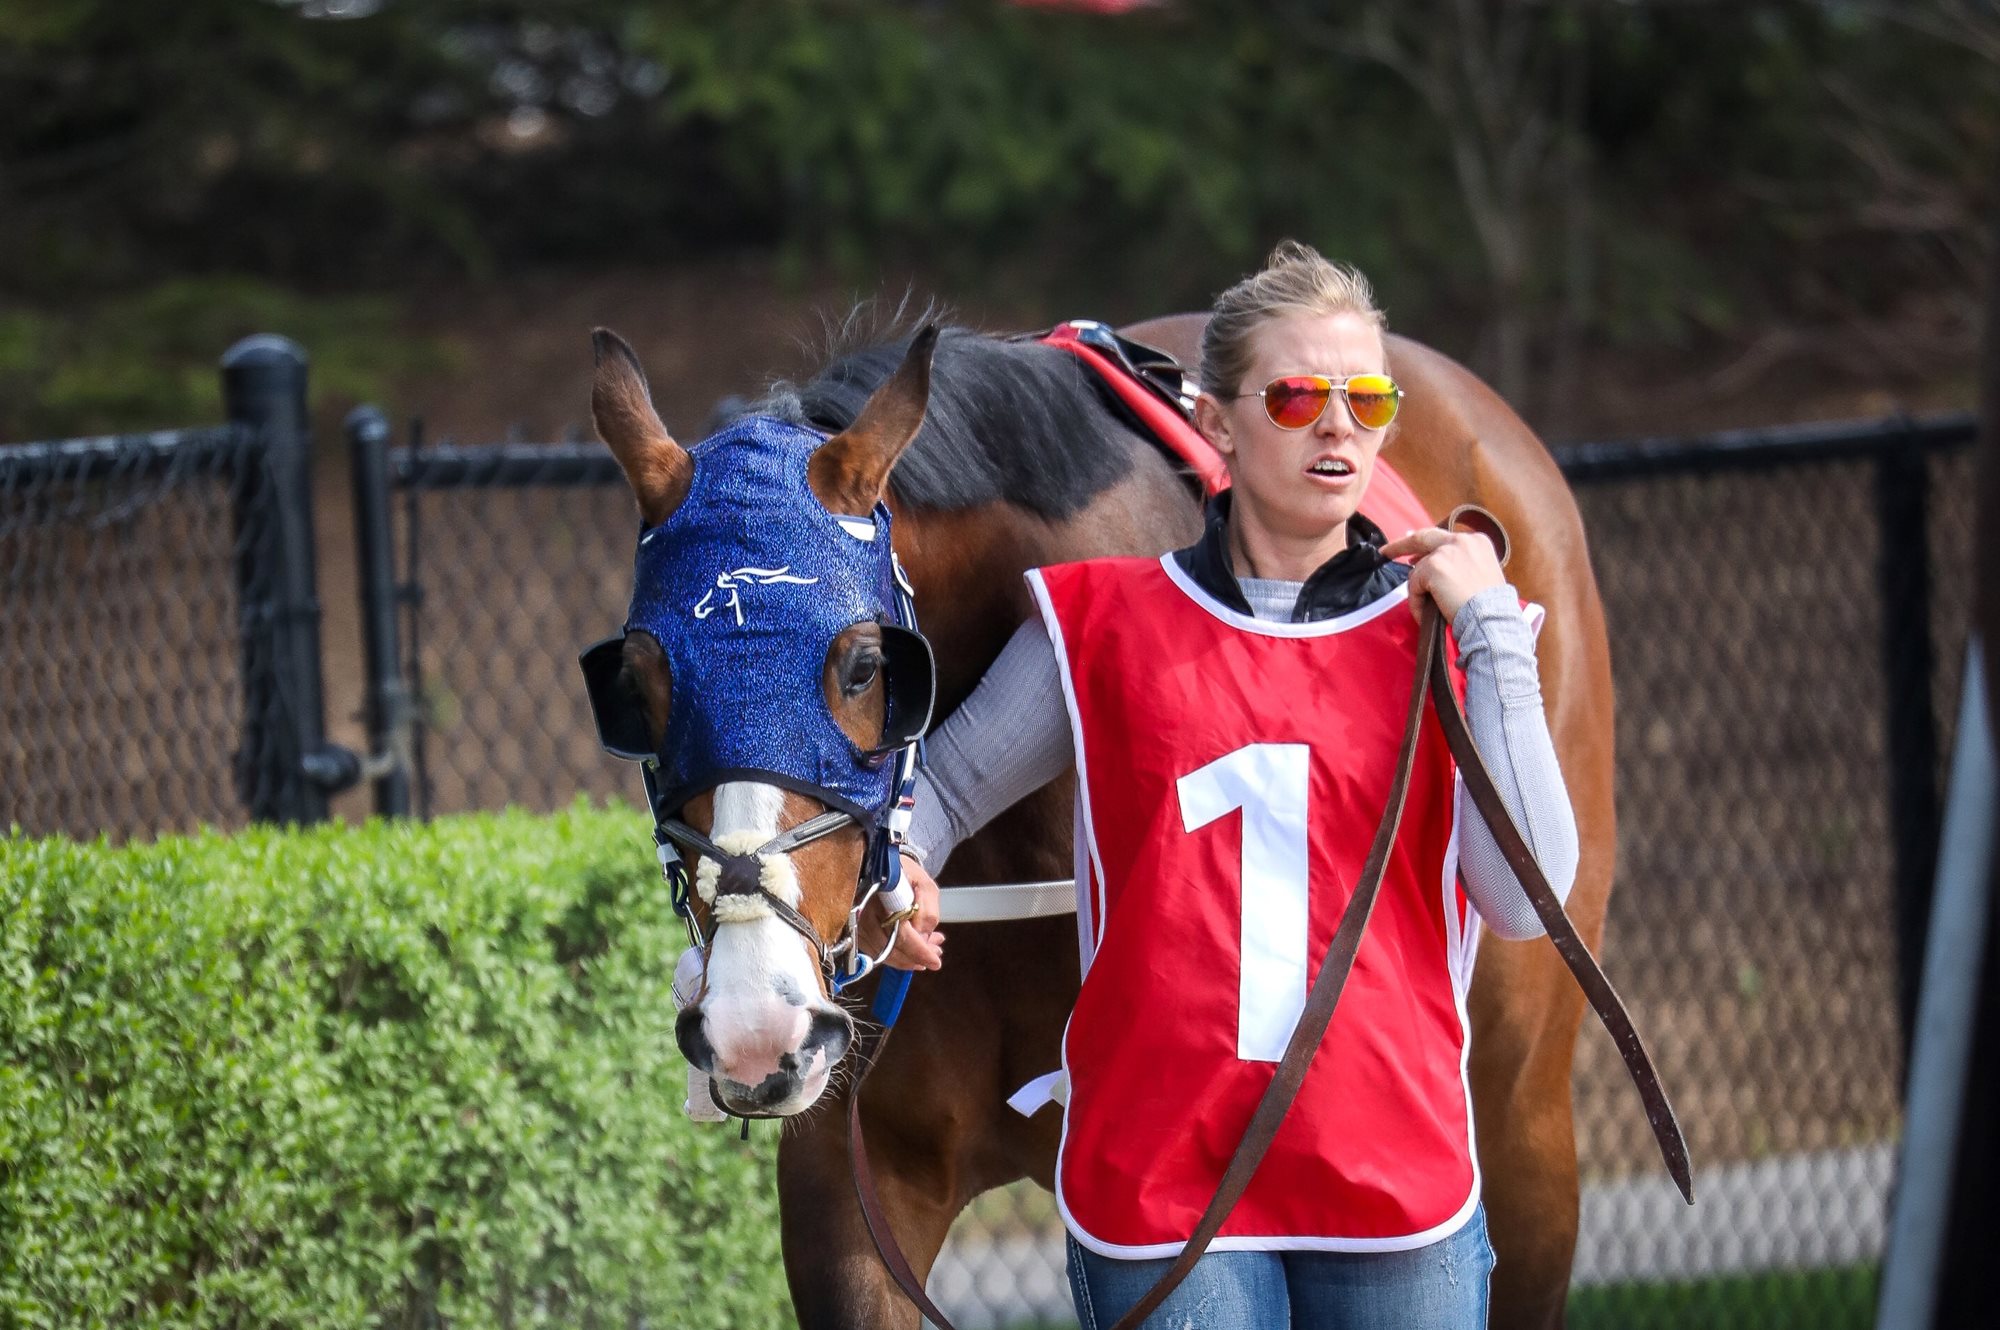 Peterborough's Michelle Olson Set to race First Quarter Horse